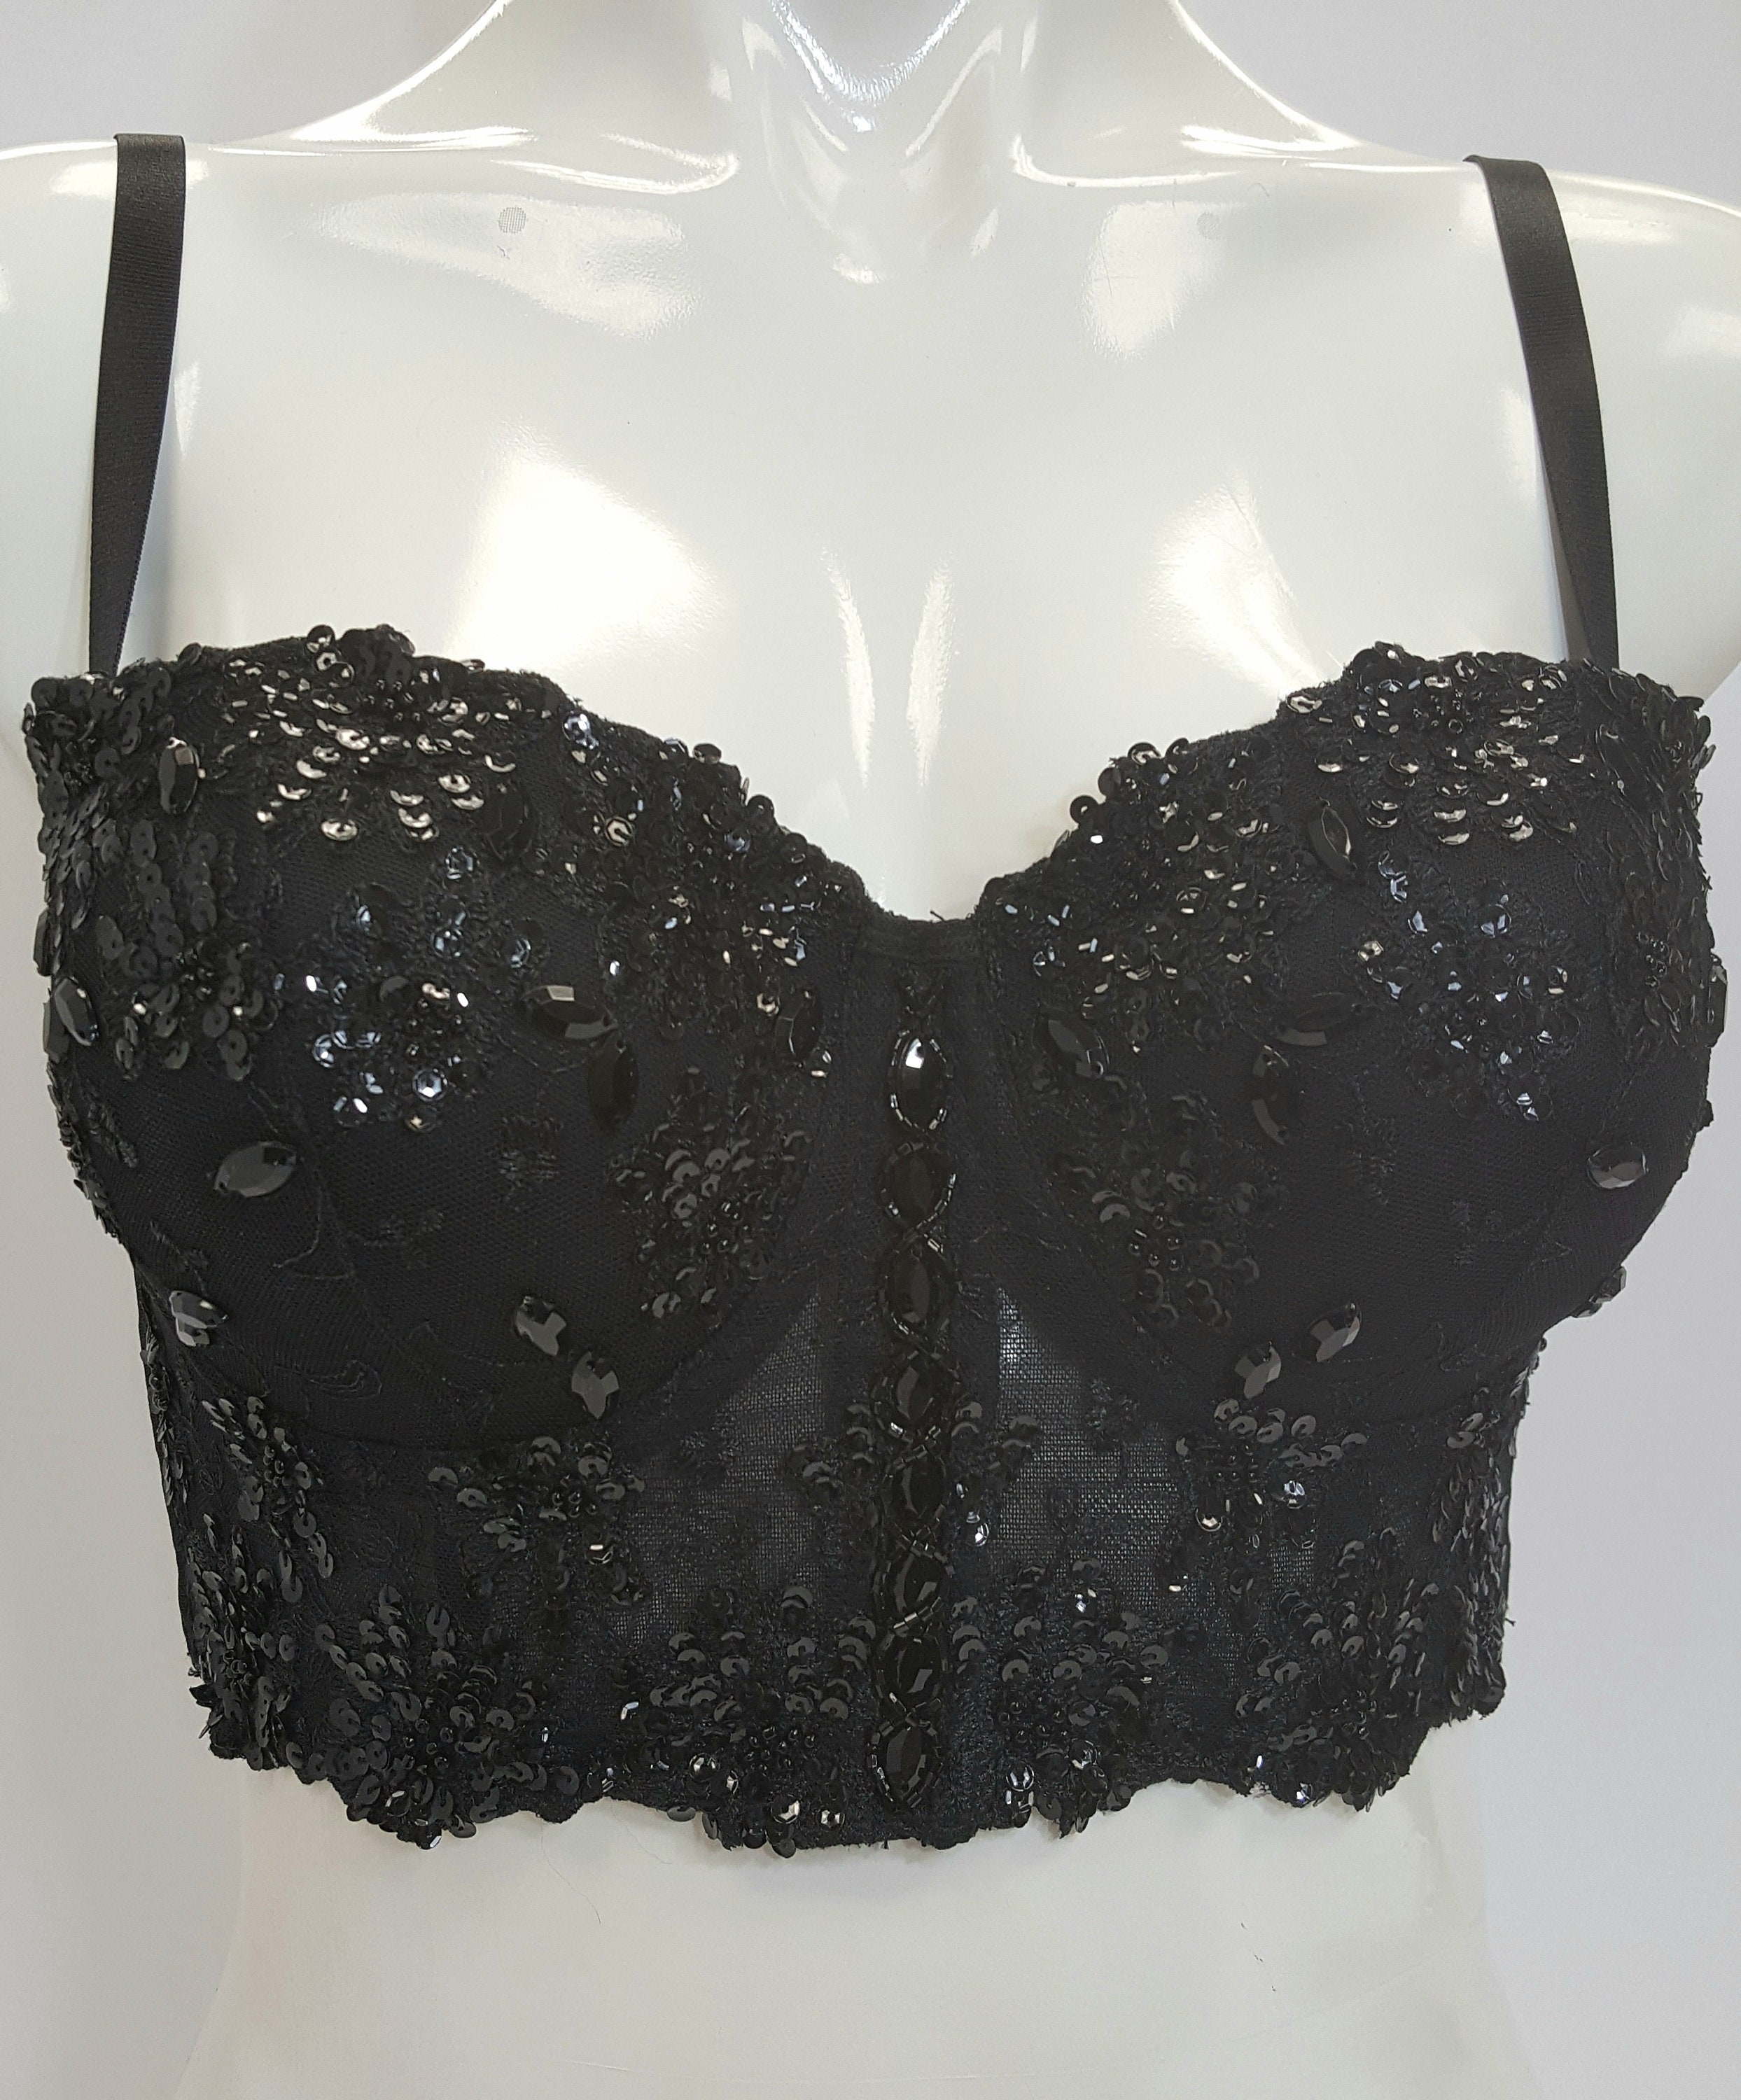 All Black Half Corset Bustier Crop Top Bralette Decorated With Sequins and  Stones. 